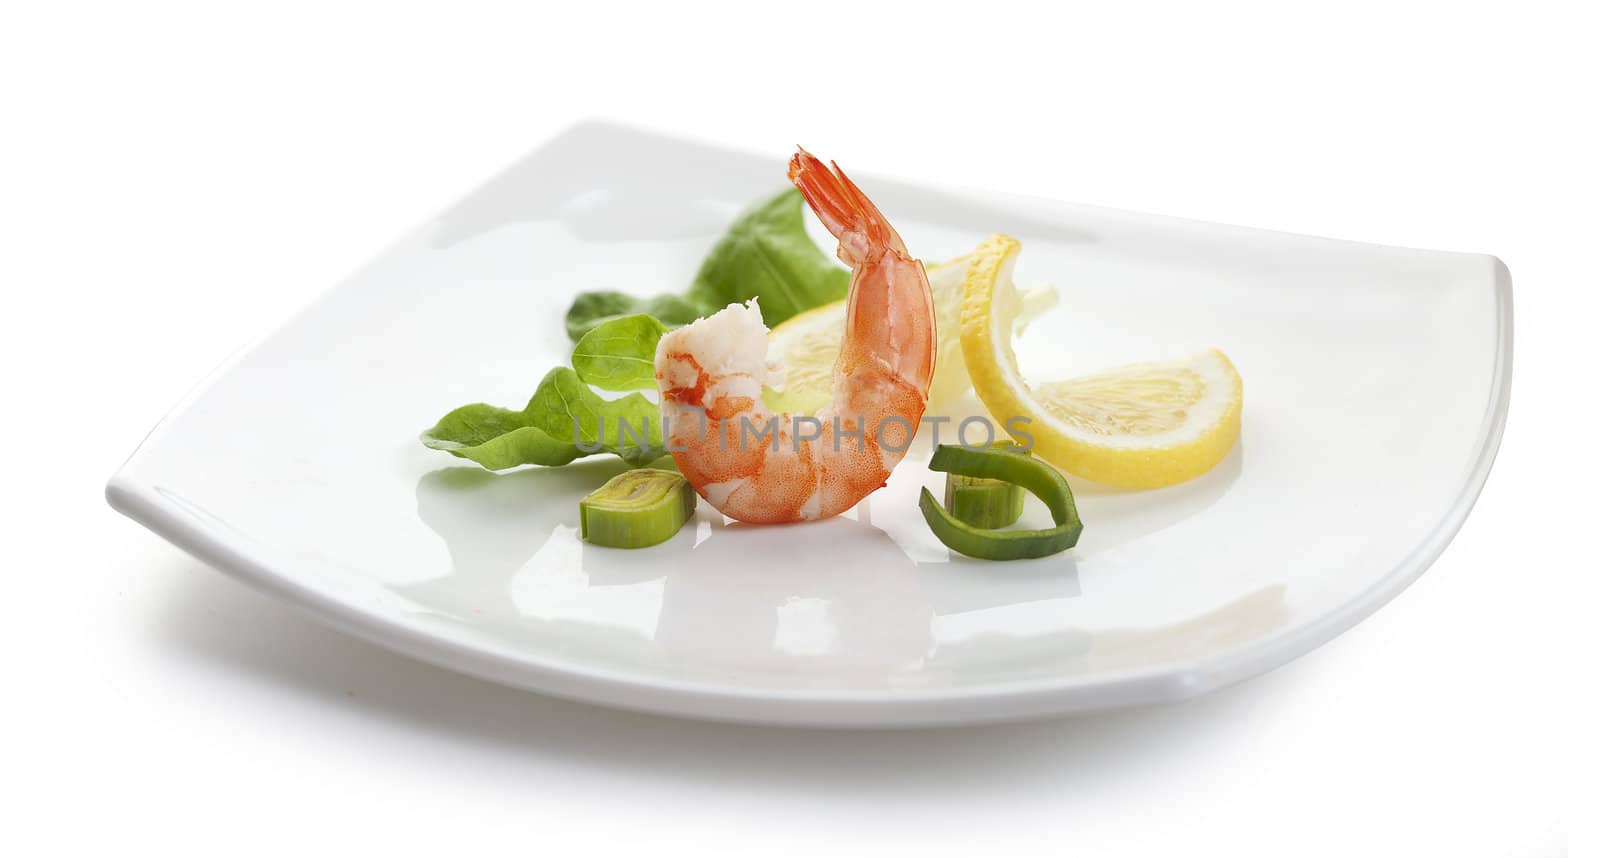 One boiled shrimp's tail with  lettuce, leek and lemon on the white plate